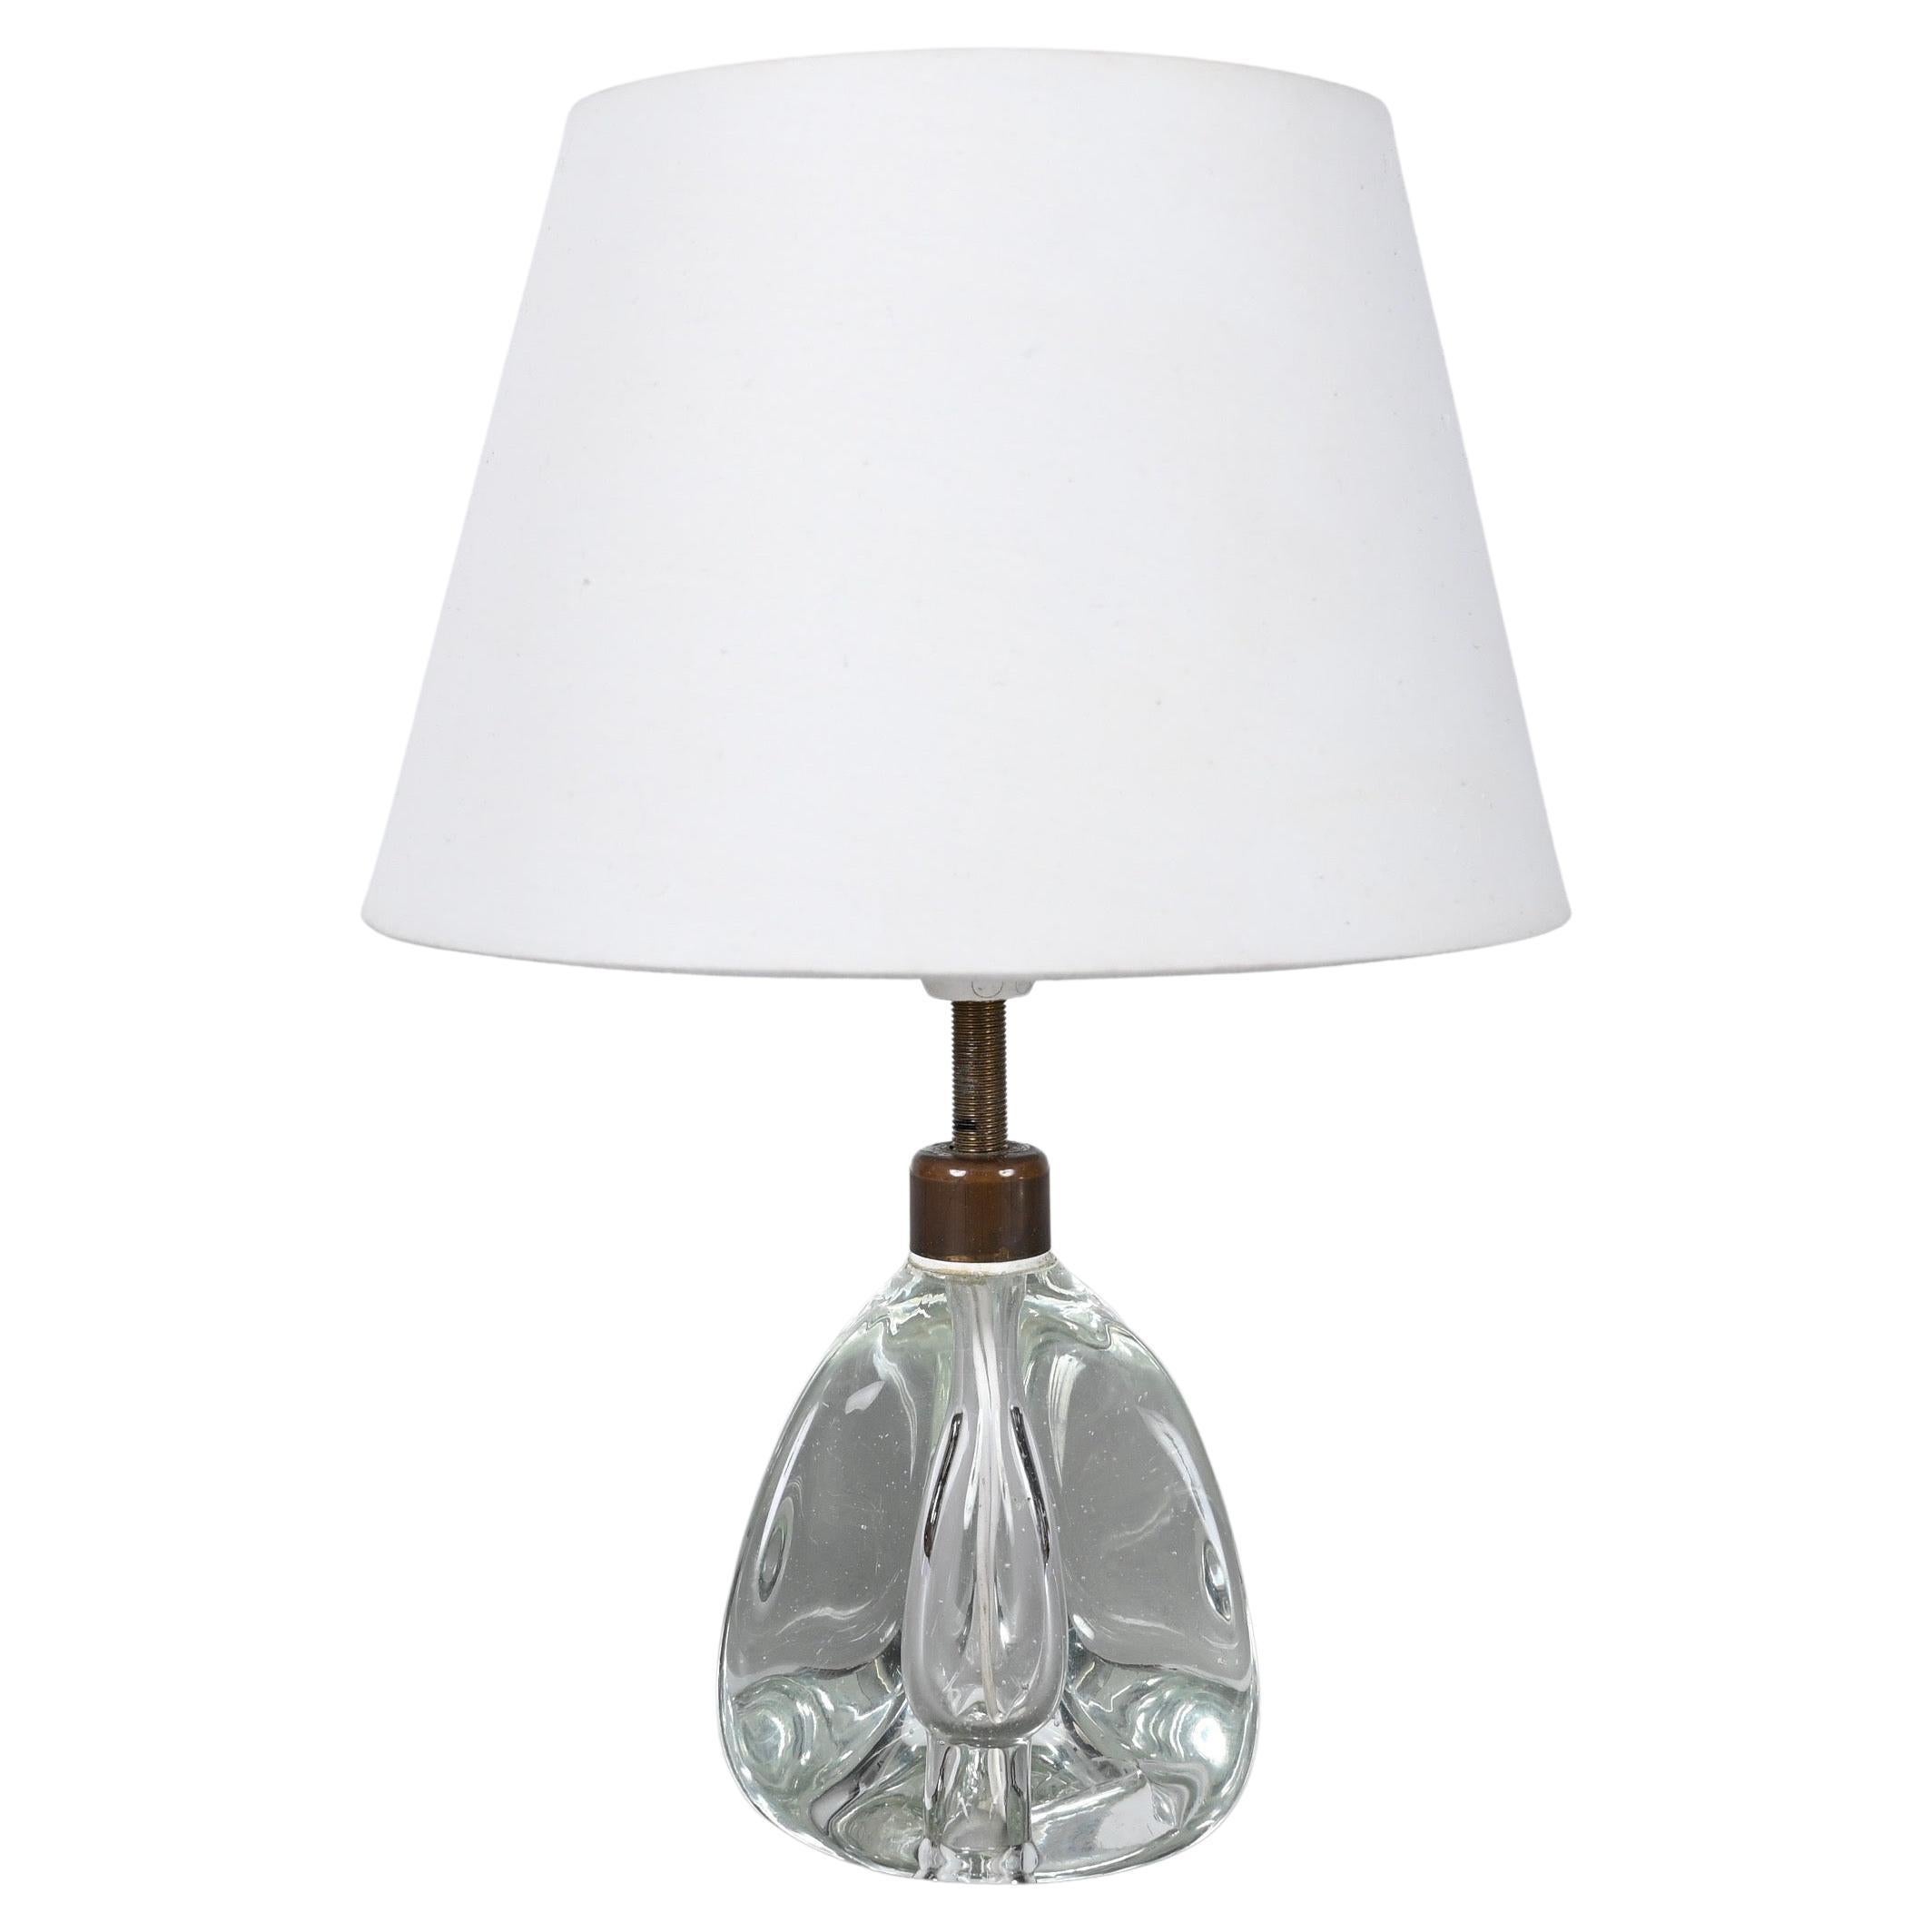 Italian table lamp Archimede Seguso in Murano crystal, 1950s - Used |  auctionlab